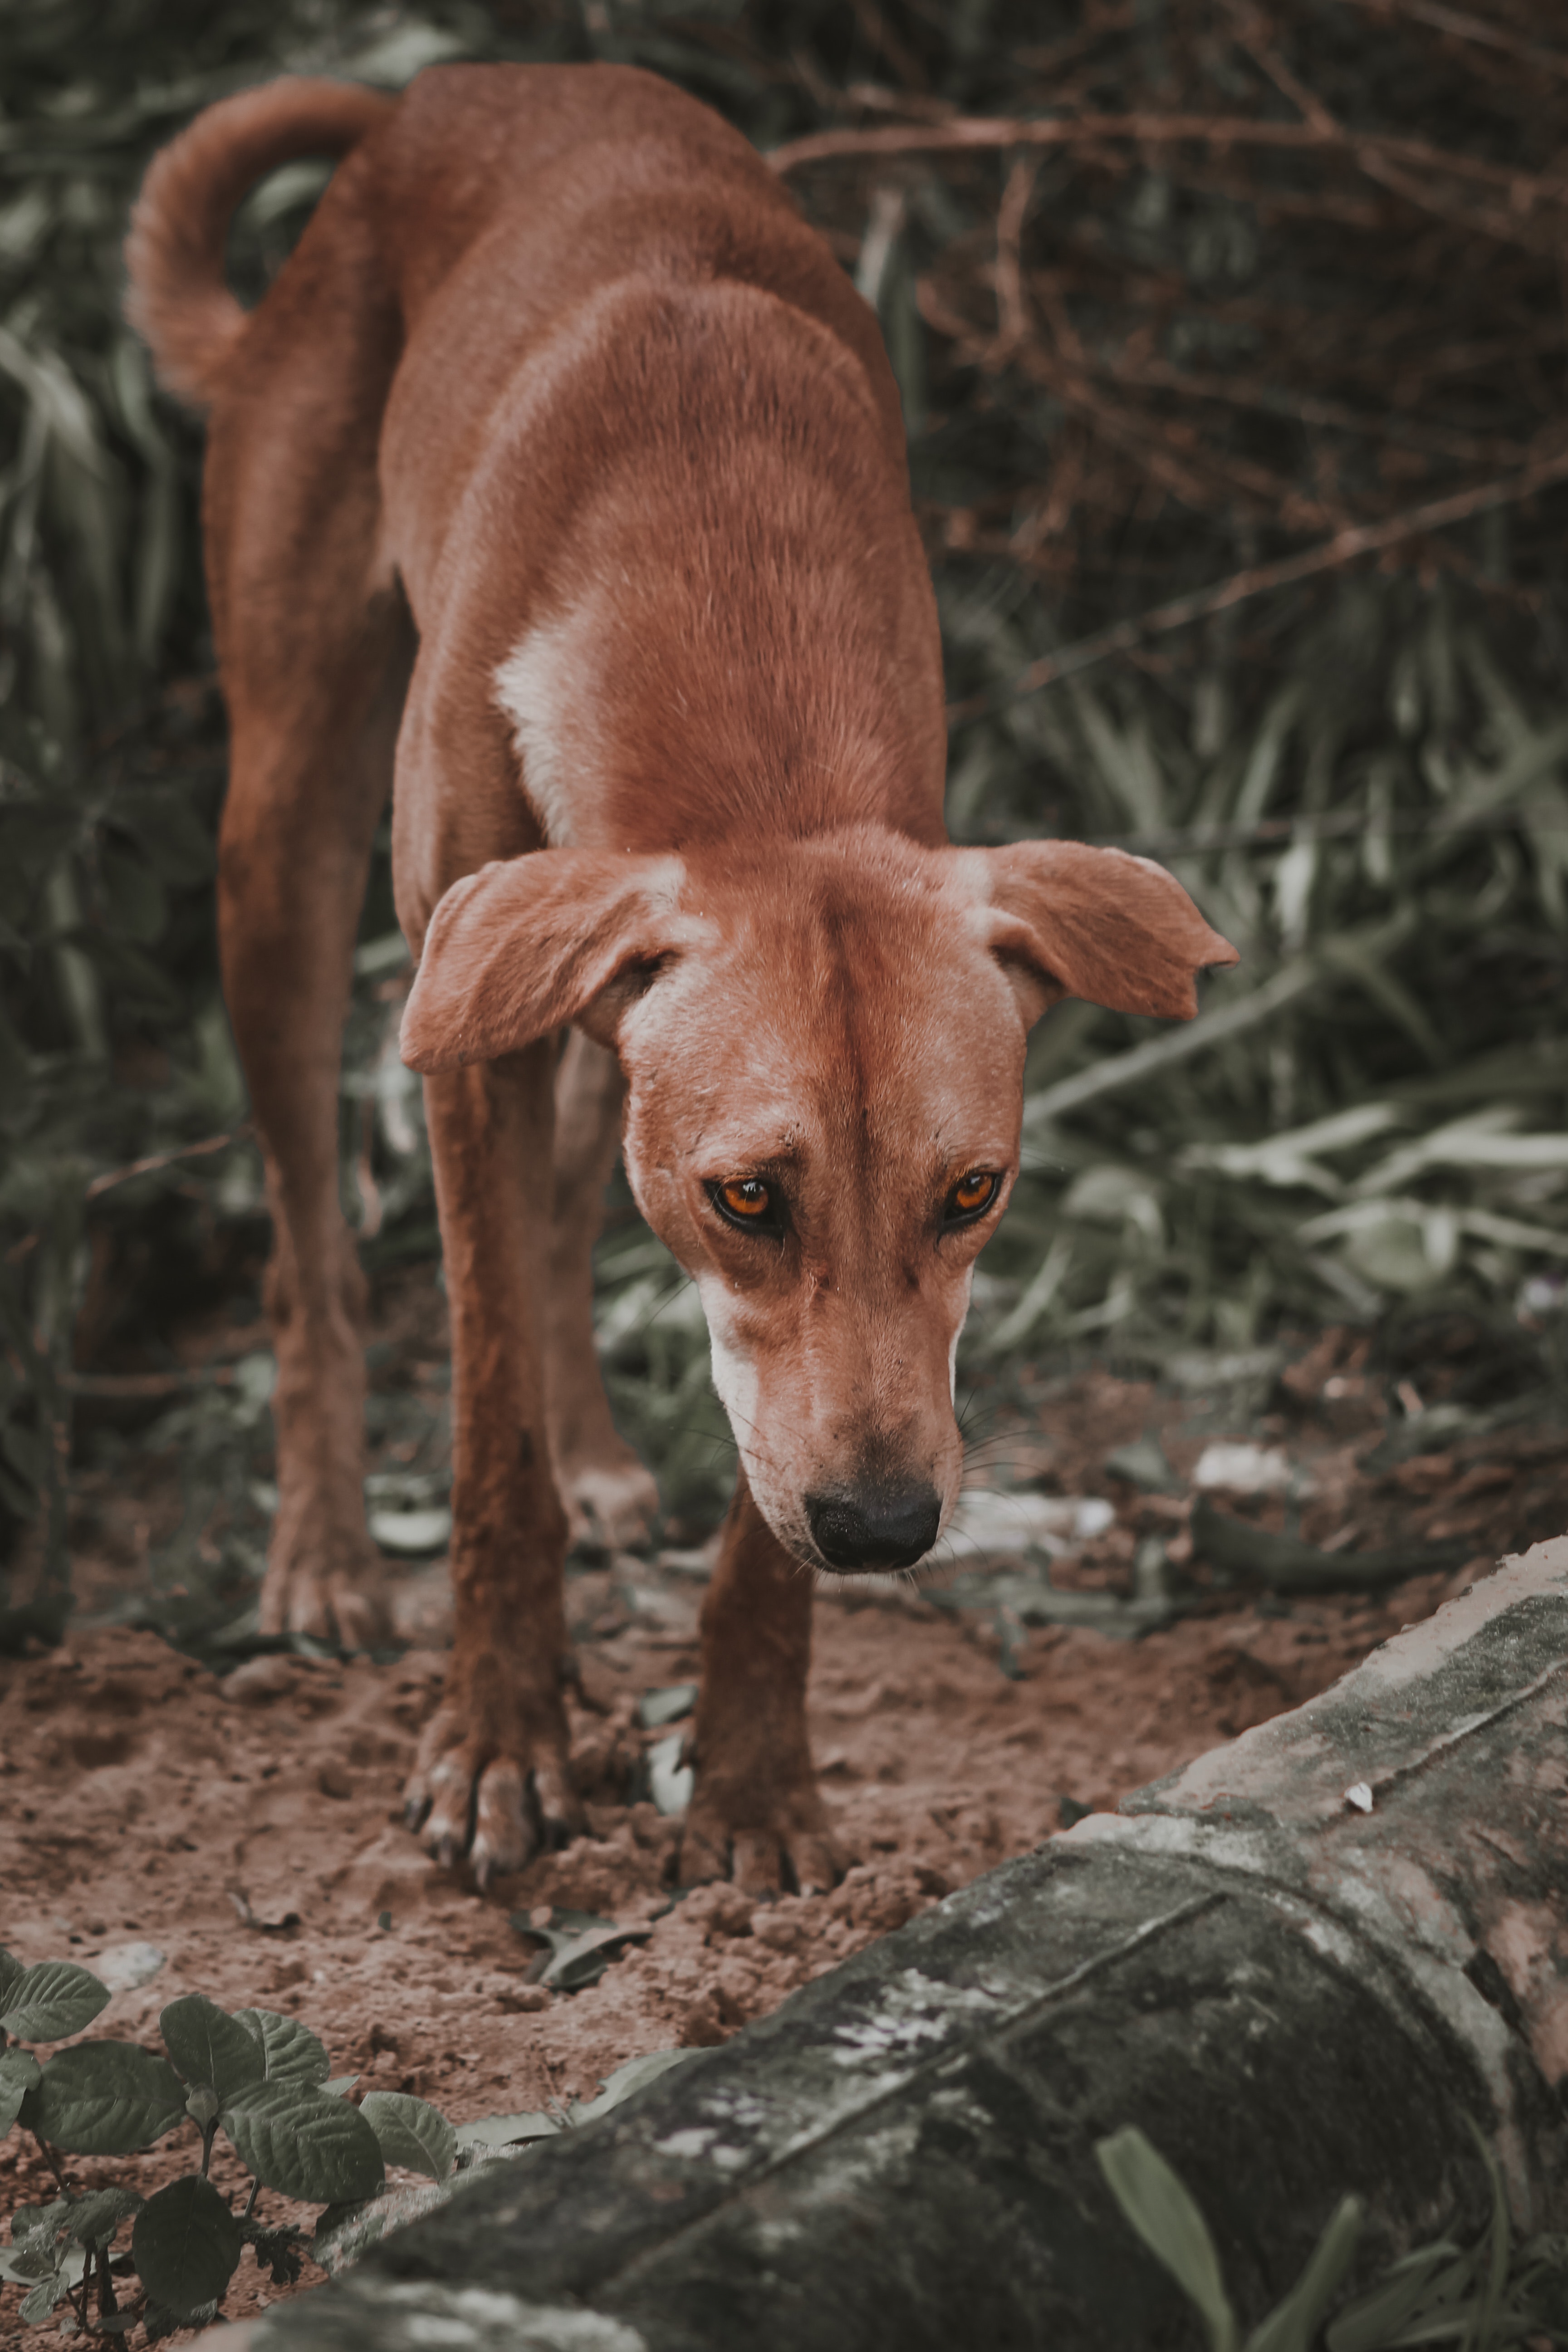 Stray dog photos download the best free stray dog stock photos hd images